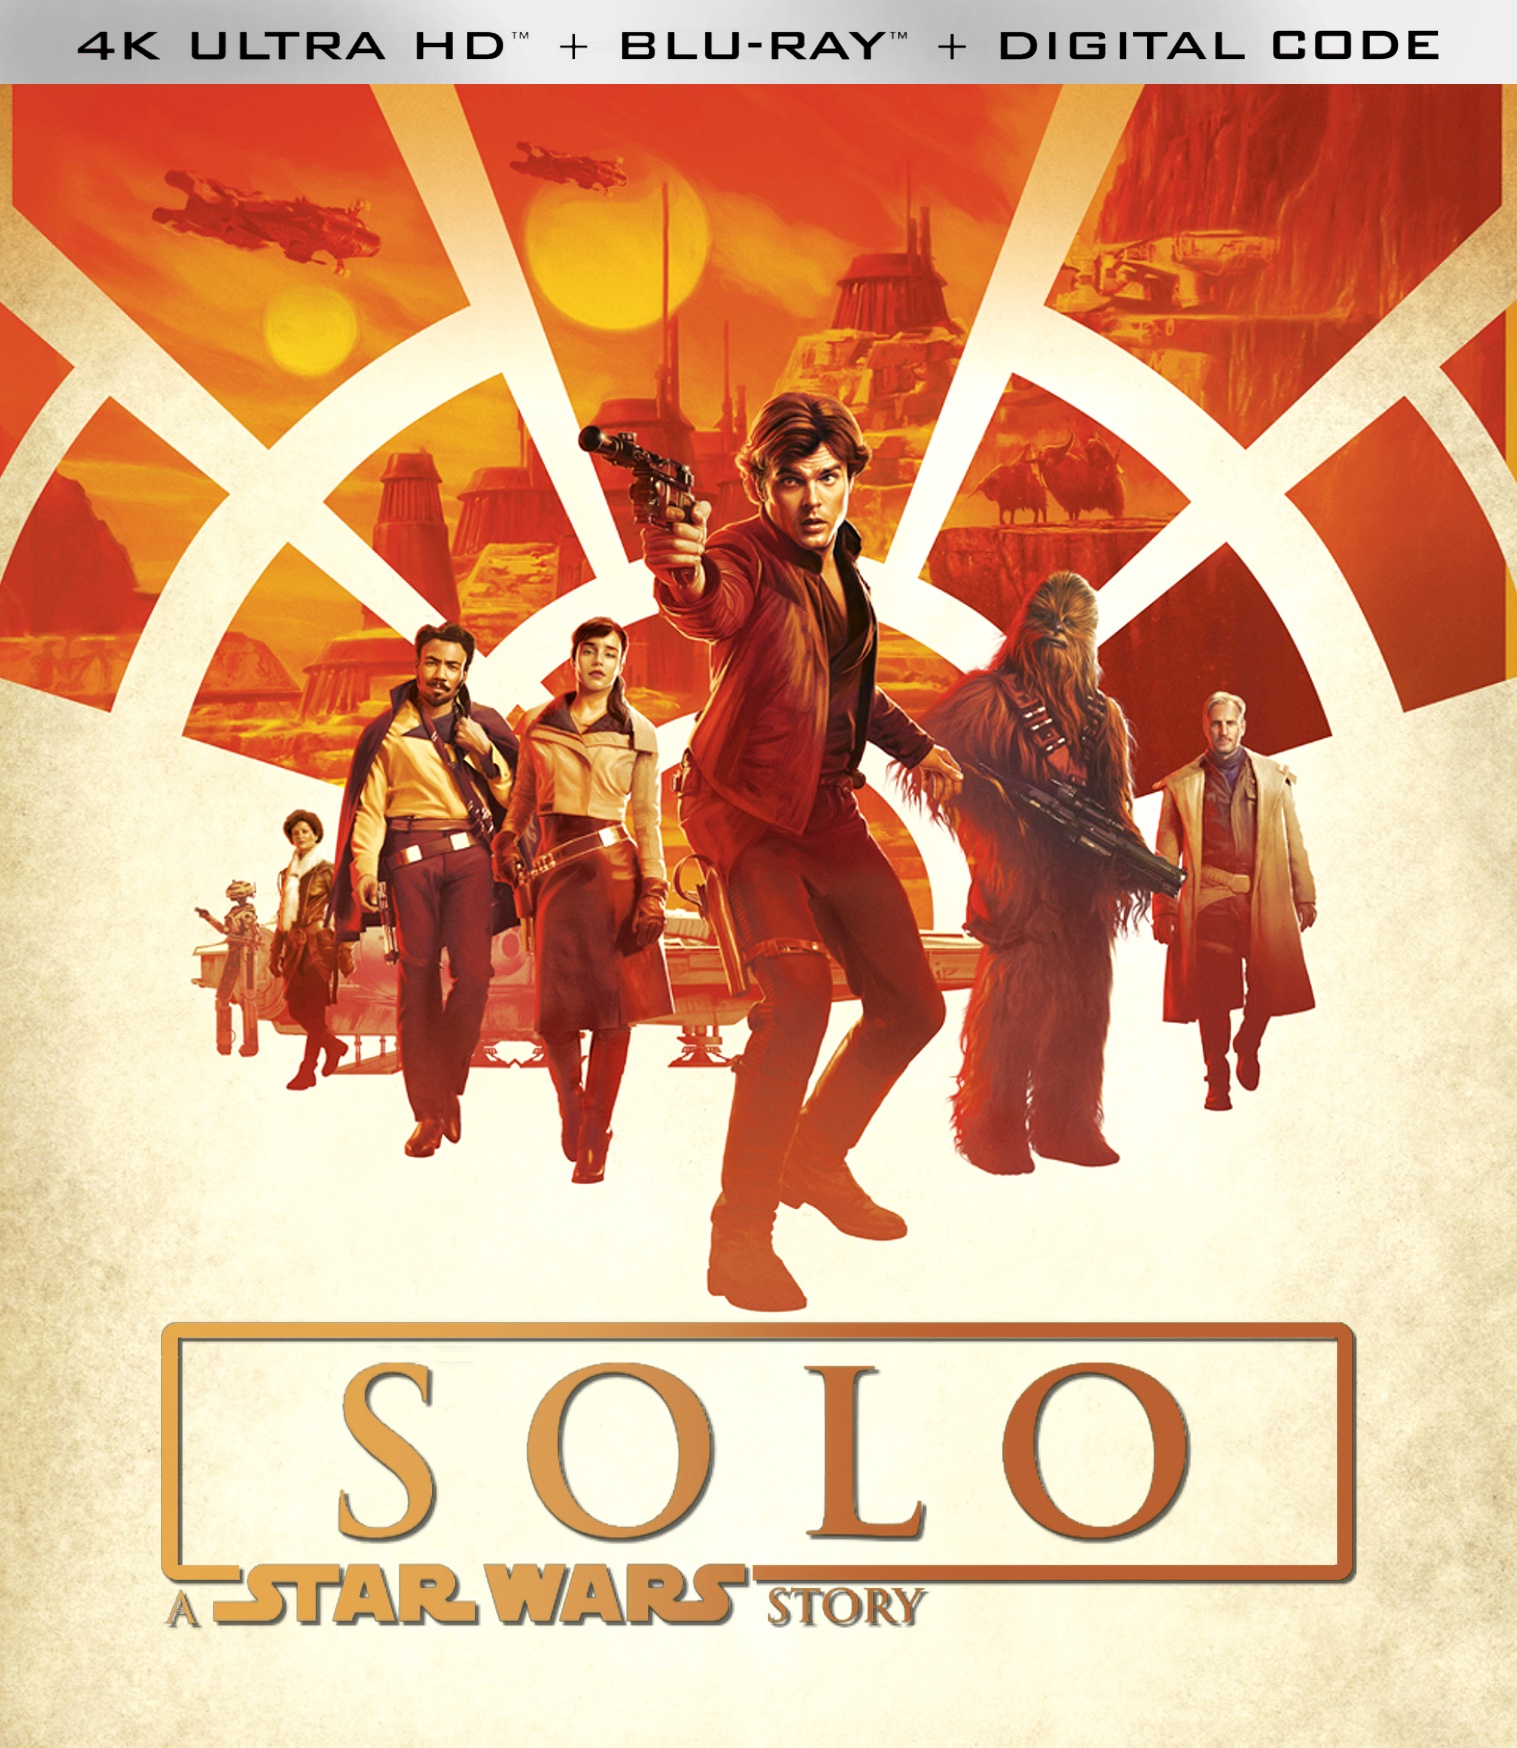 A Star Wars Story: Solo